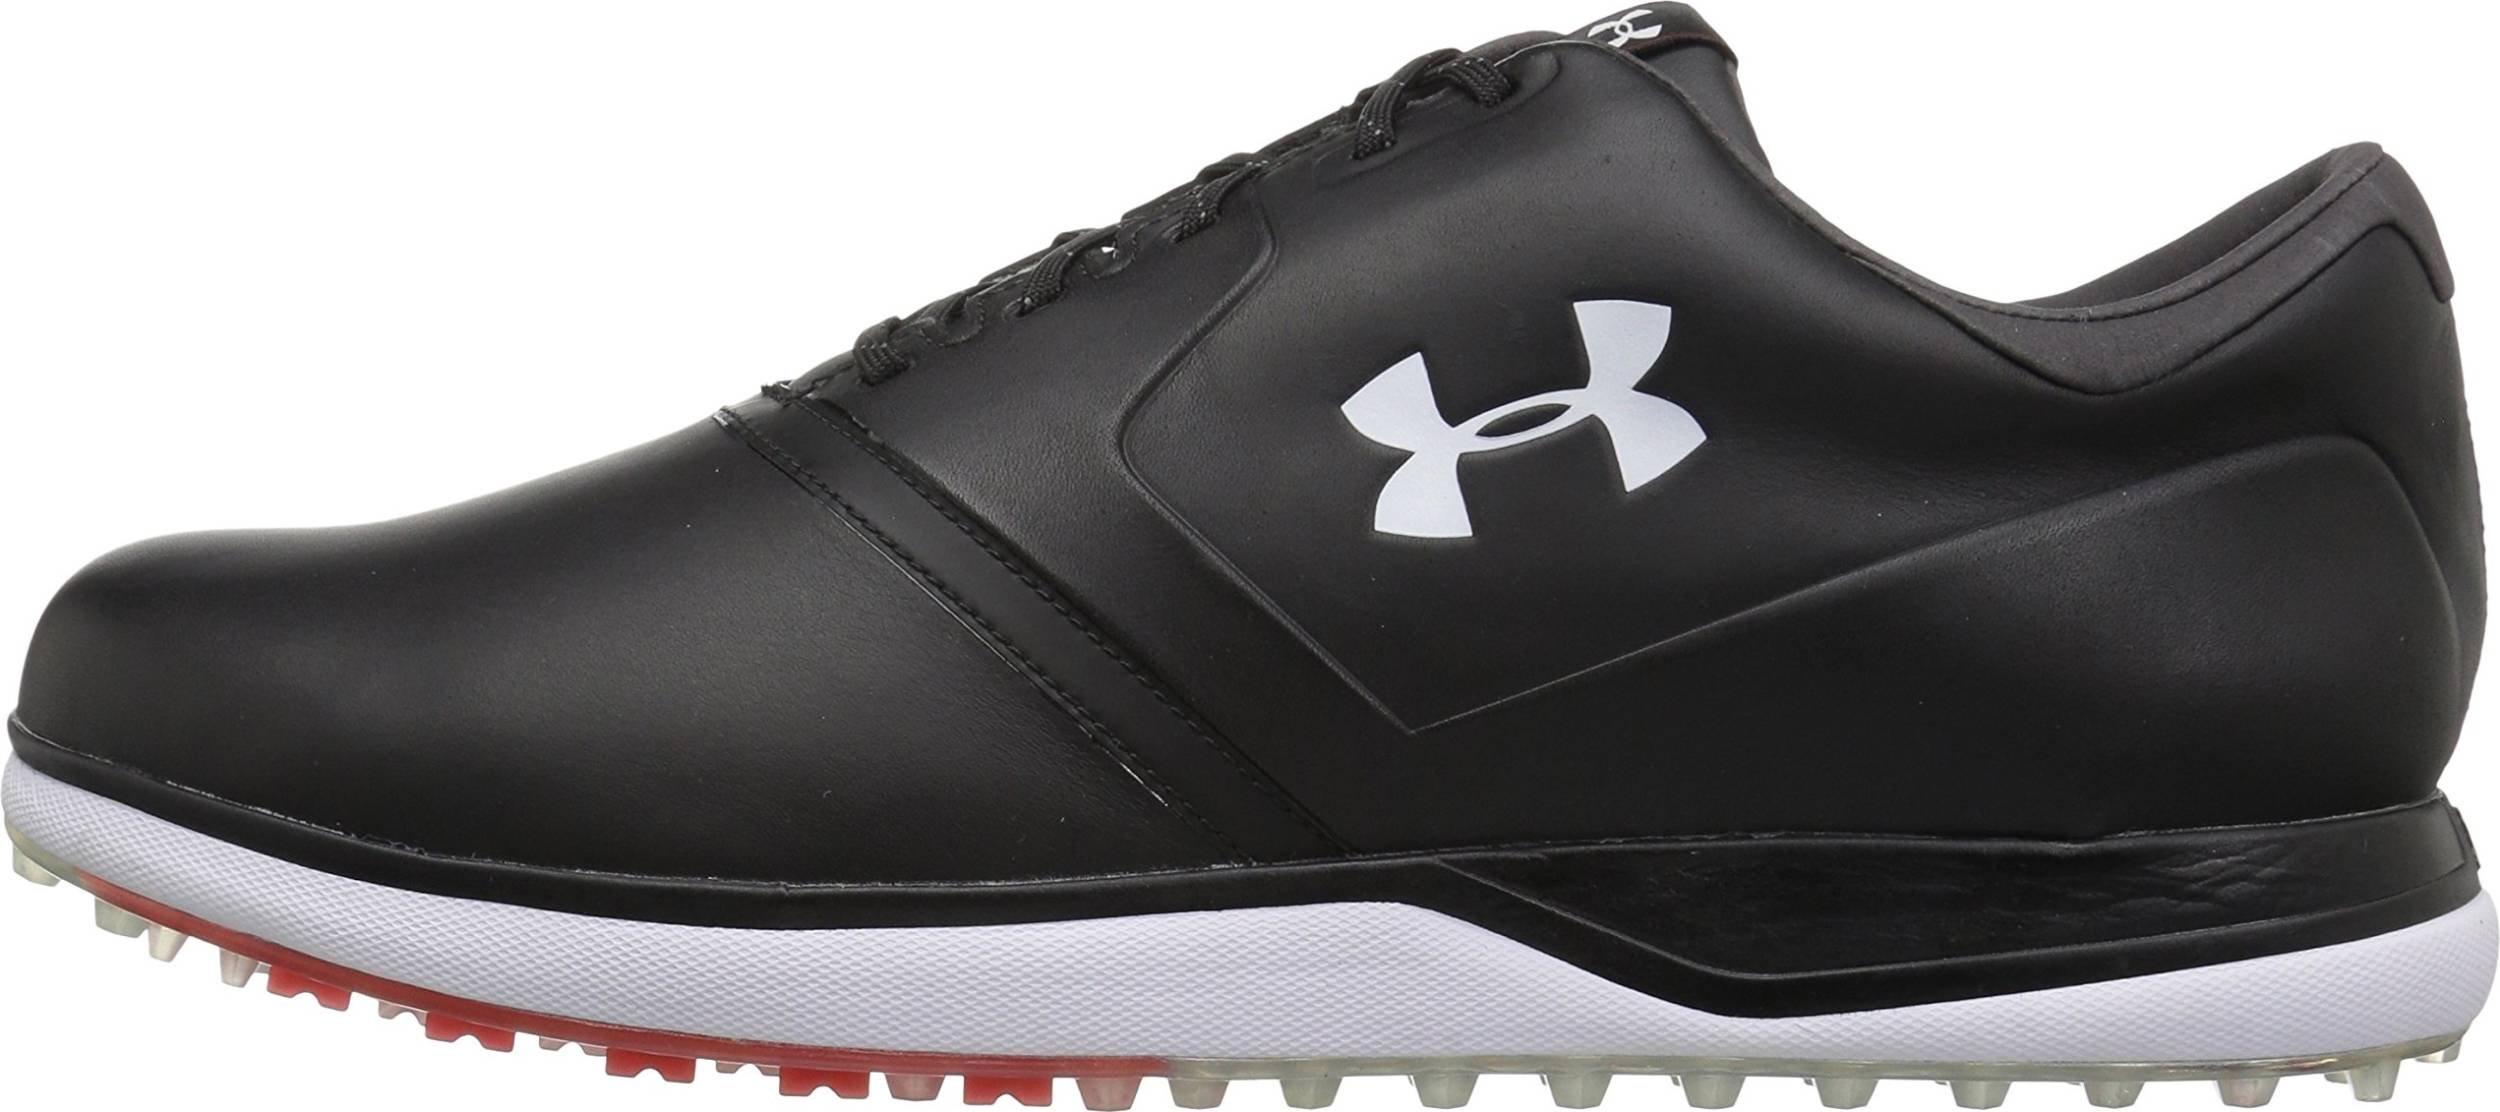 under armour skate shoes